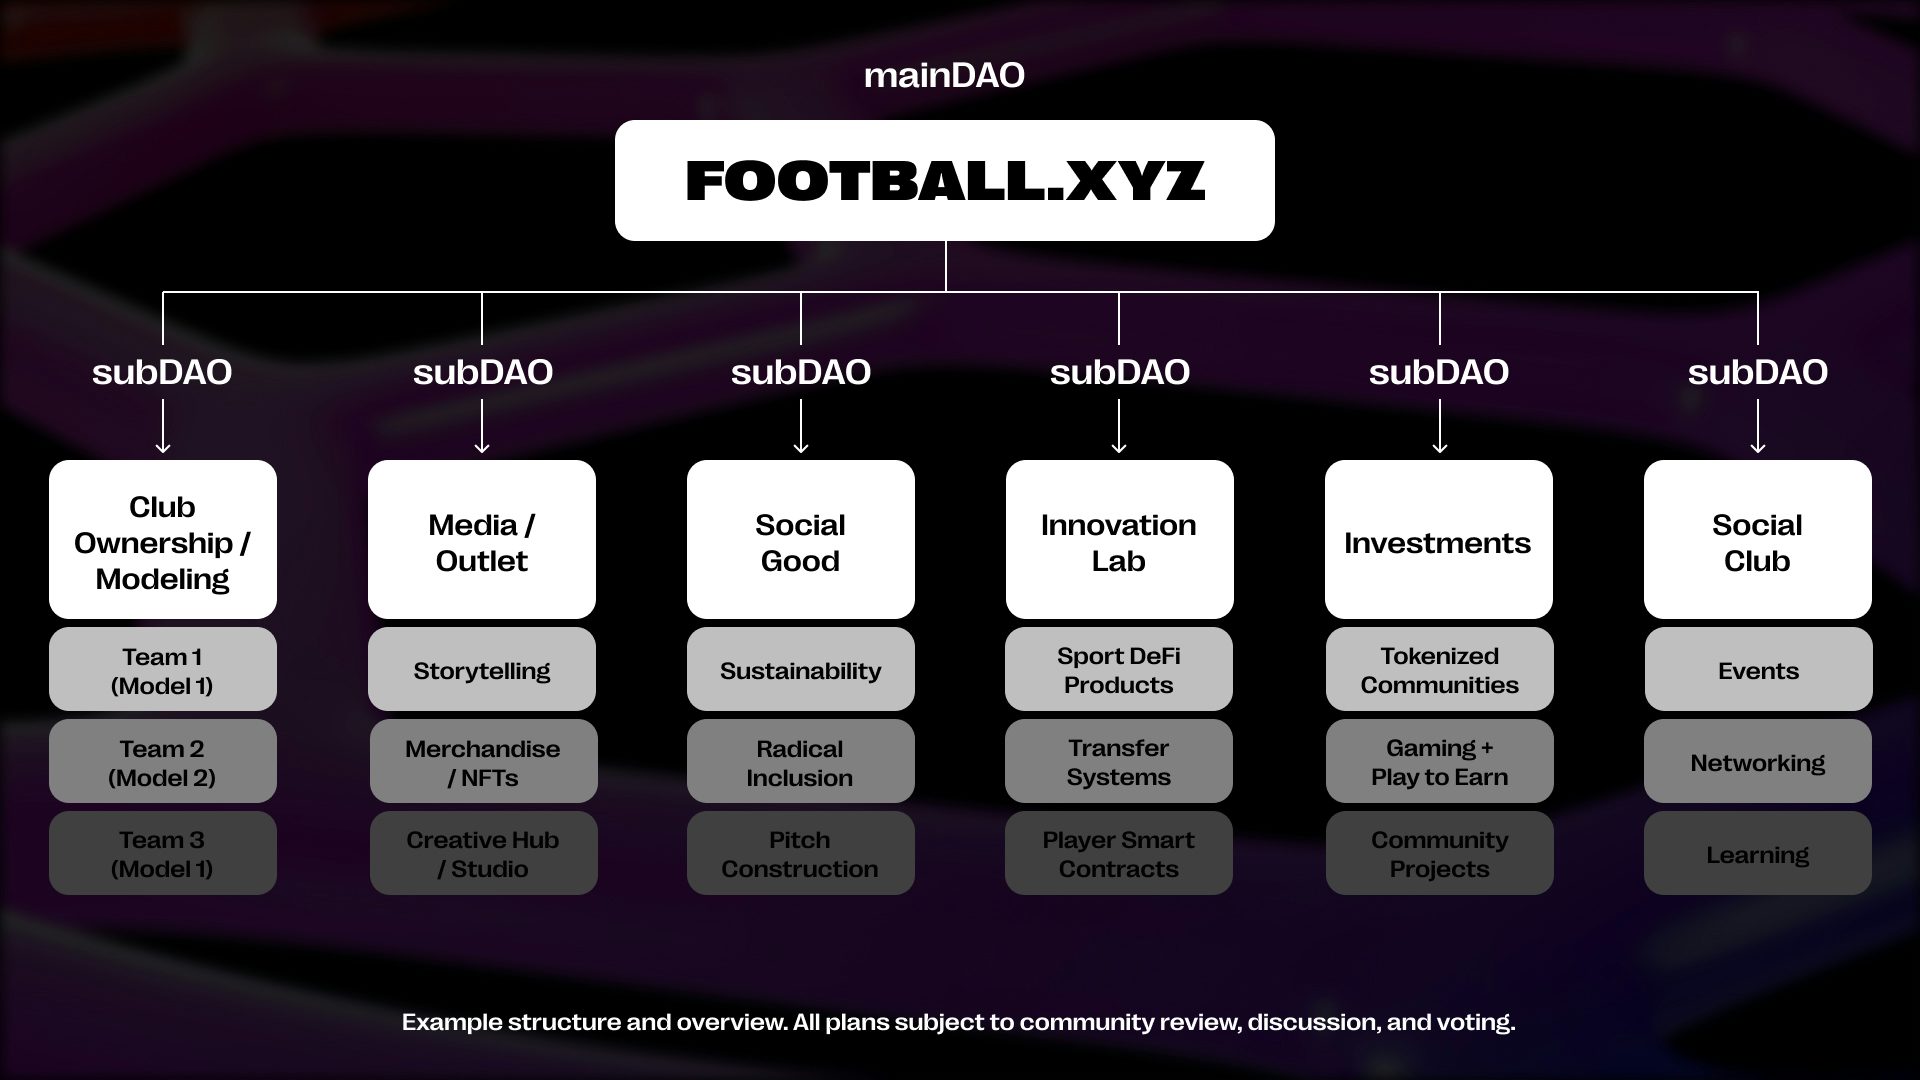 A potential structure for Football.XYZ